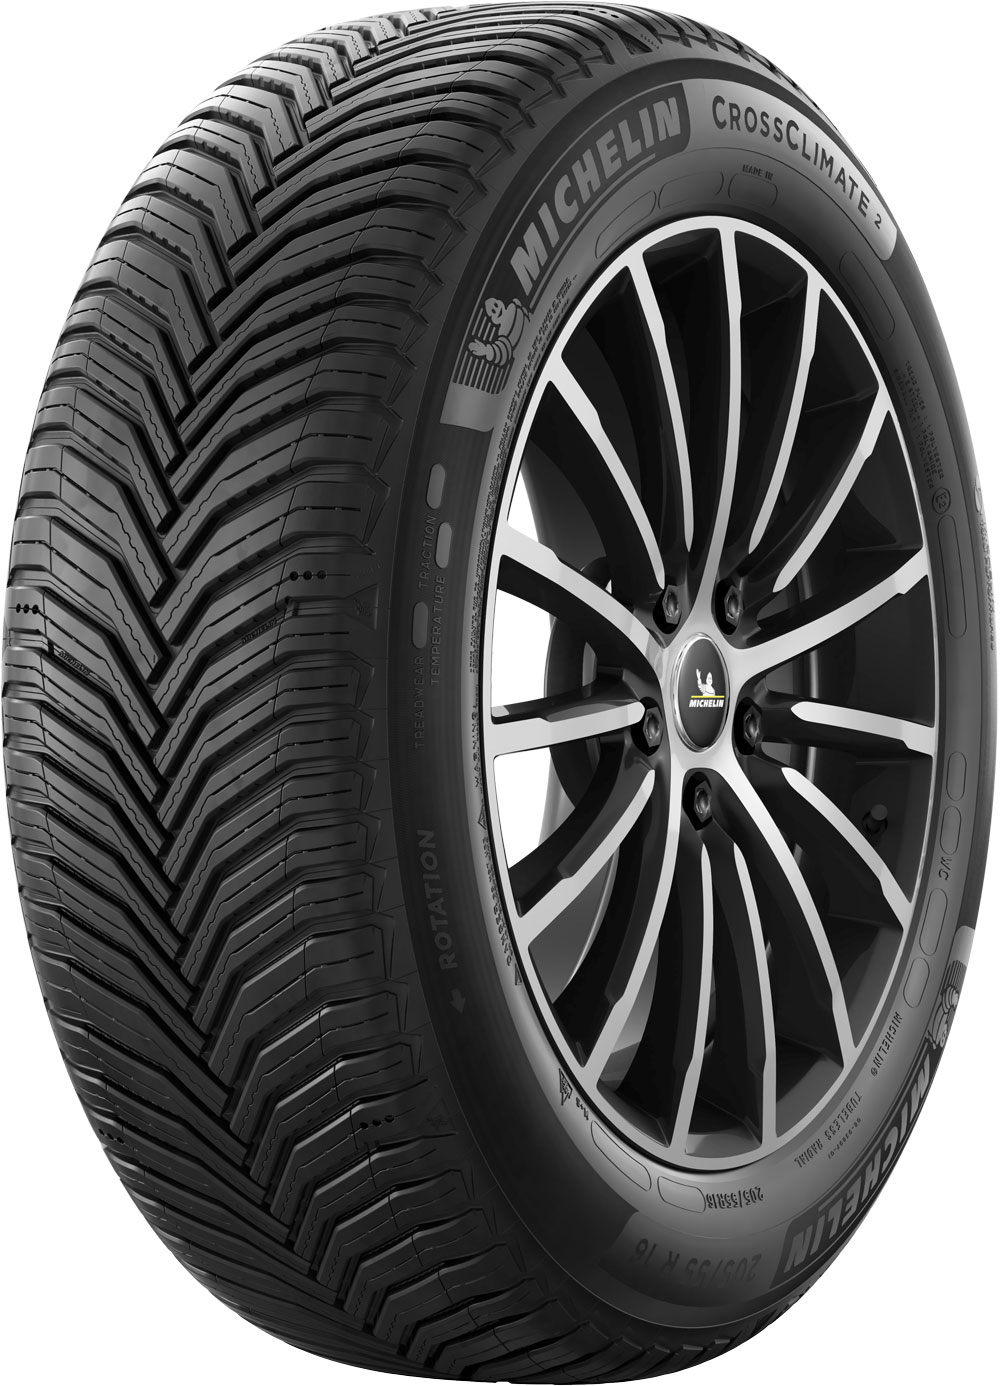 Anvelope auto MICHELIN CROSSCLIMATE 2 XL XL 245/40 R19 98Y